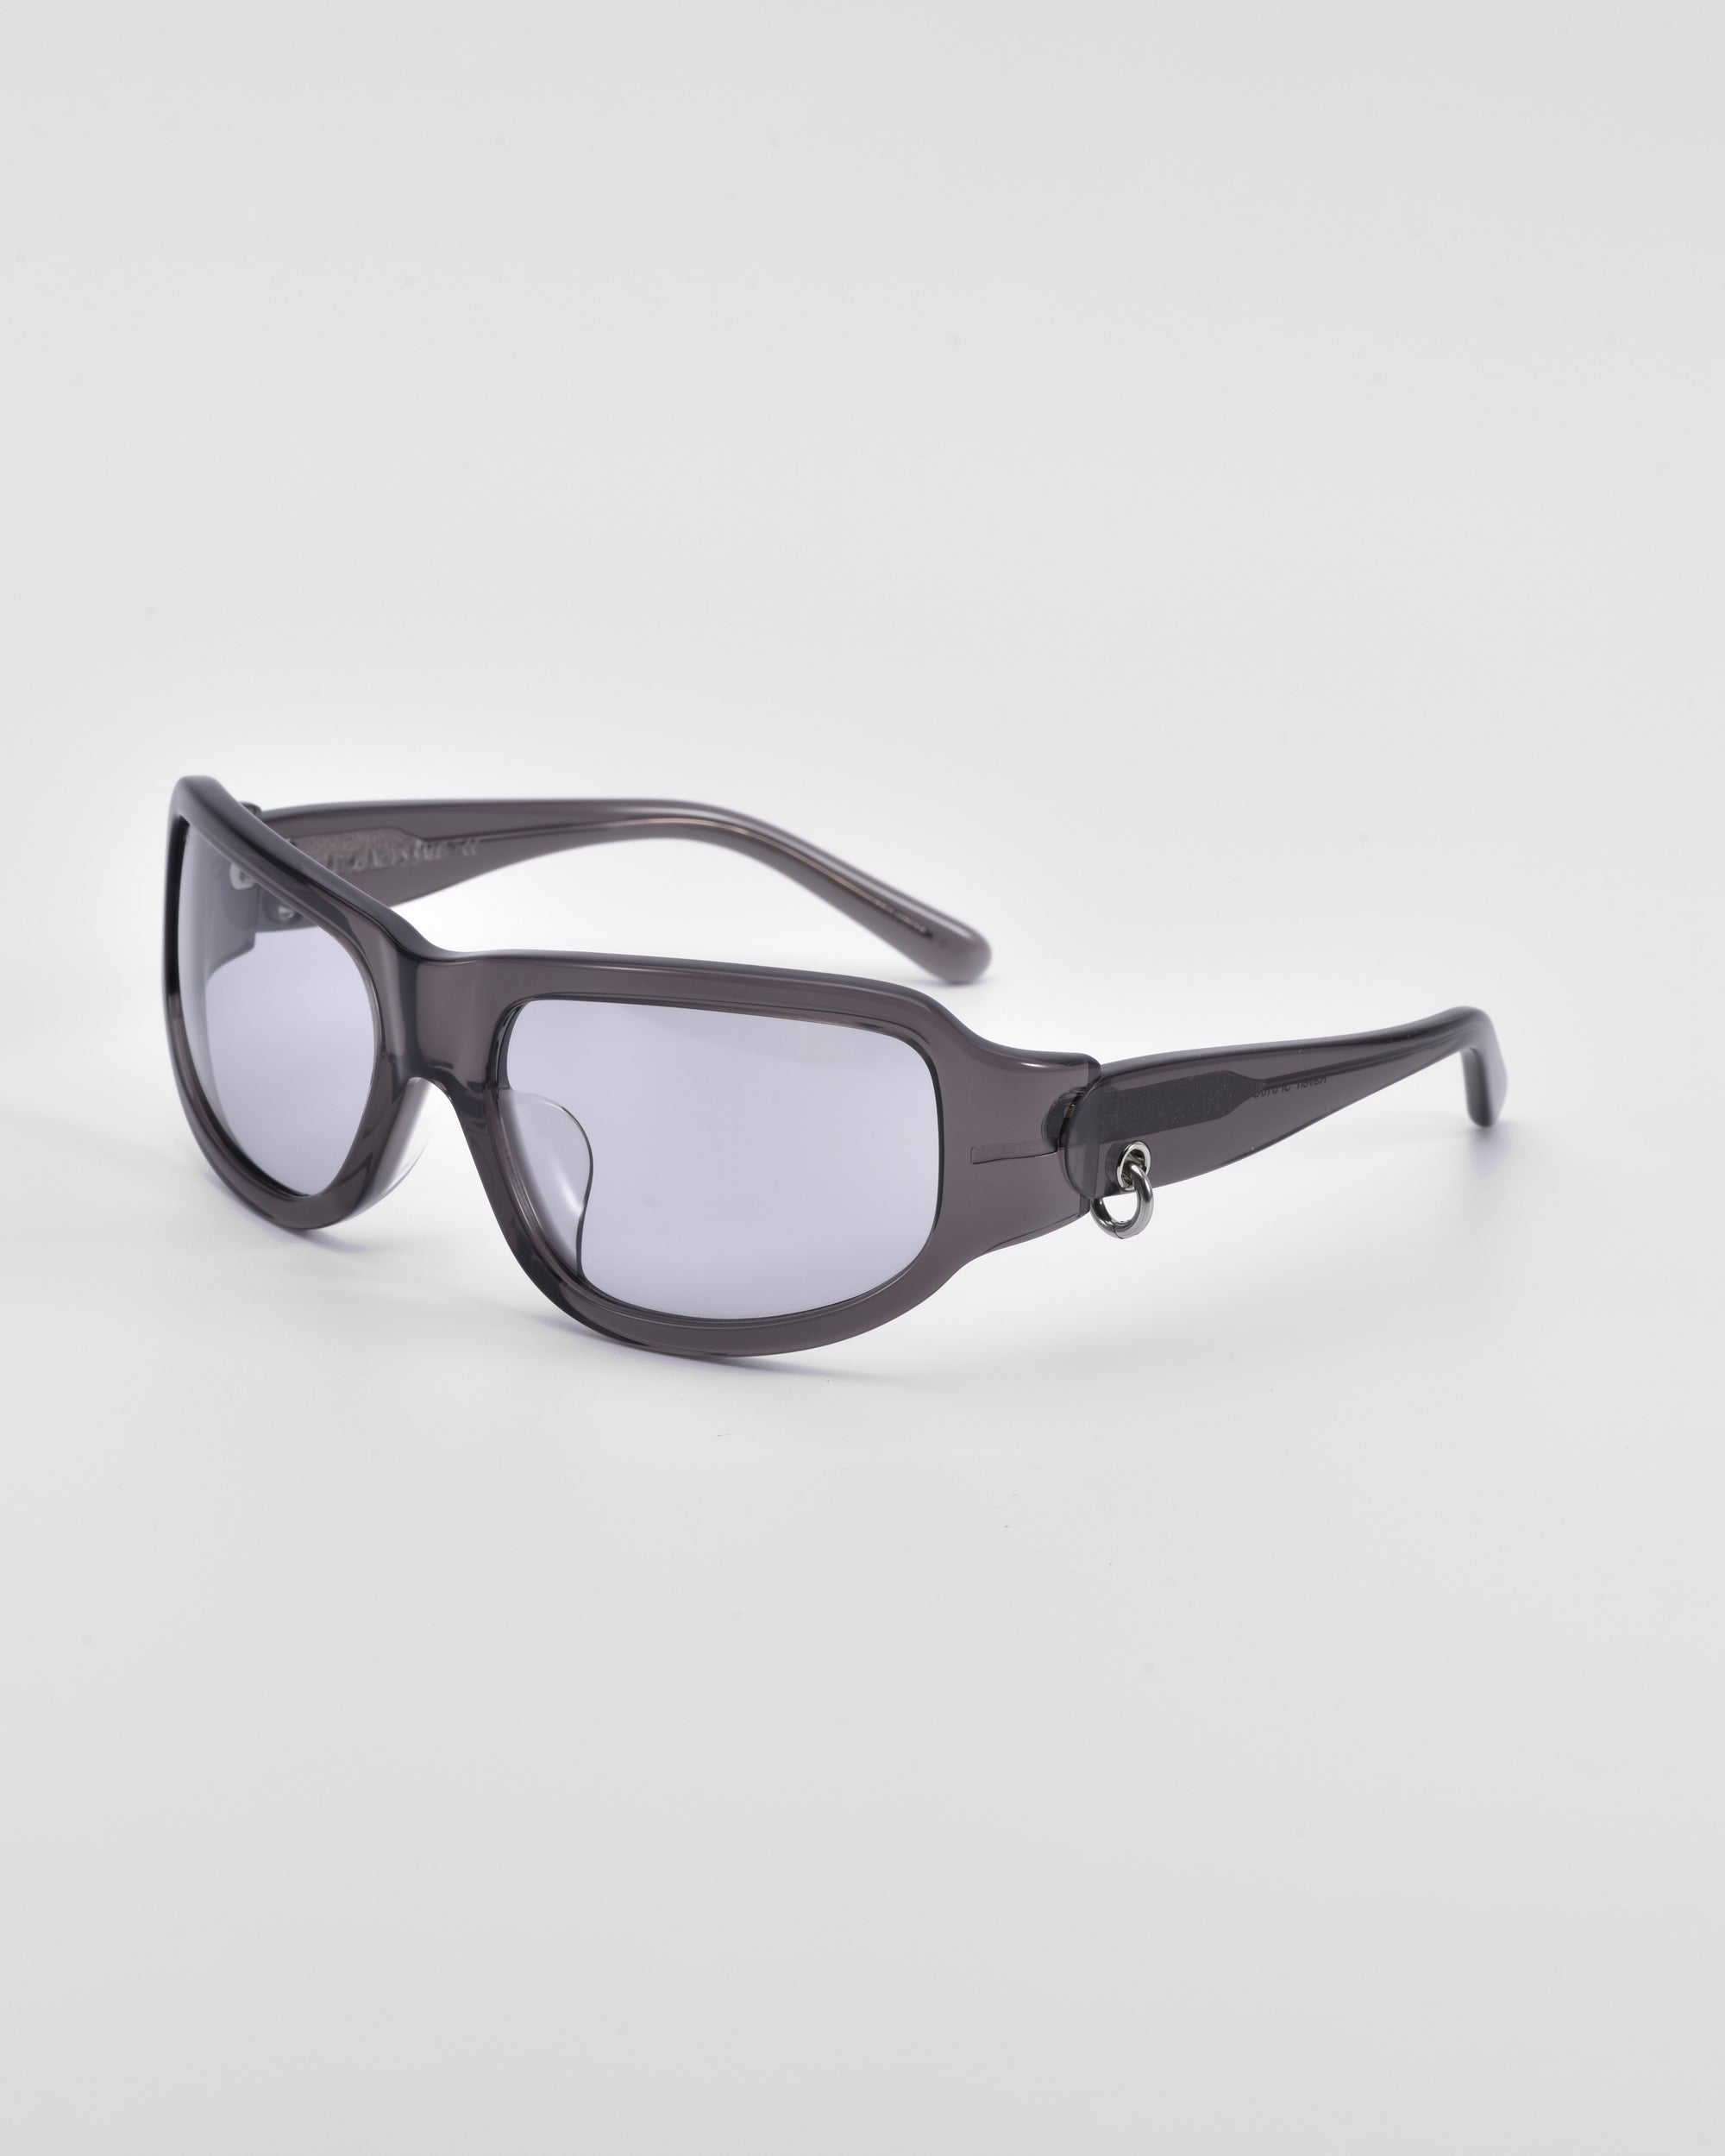 A pair of sleek, dark-colored For Art&#39;s Sake® Raven sunglasses with a small decorative metal ring on the temple arm. The lenses are tinted grey, and the frames are curved for a snug fit. Perfectly embodying the stylish flair of Y2K wrap sunglasses, they stand out against a plain white background.